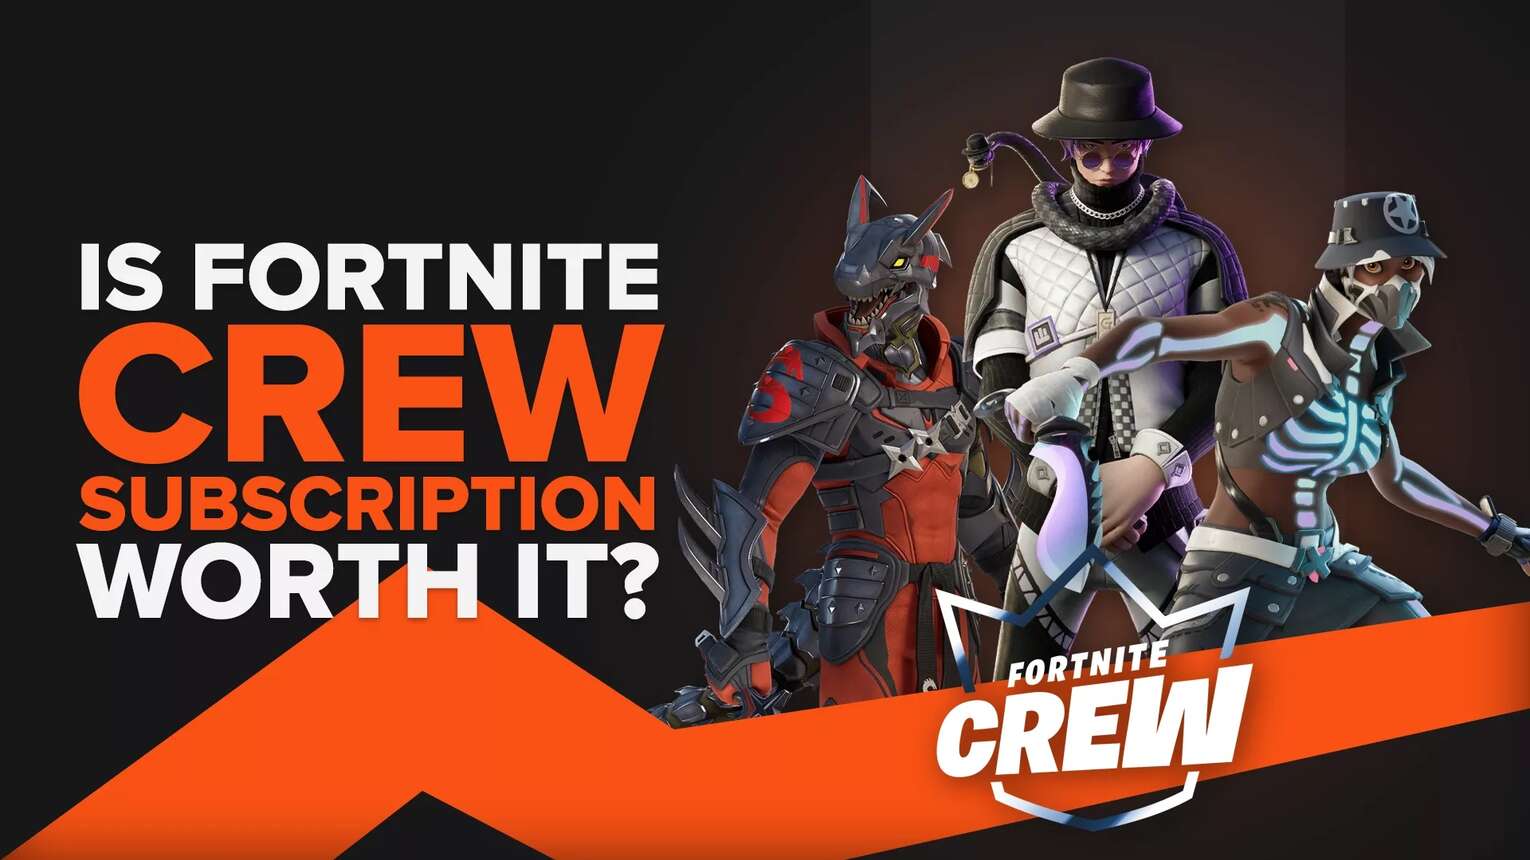 Is Fortnite Crew Subscription Worth It? [Analysis]